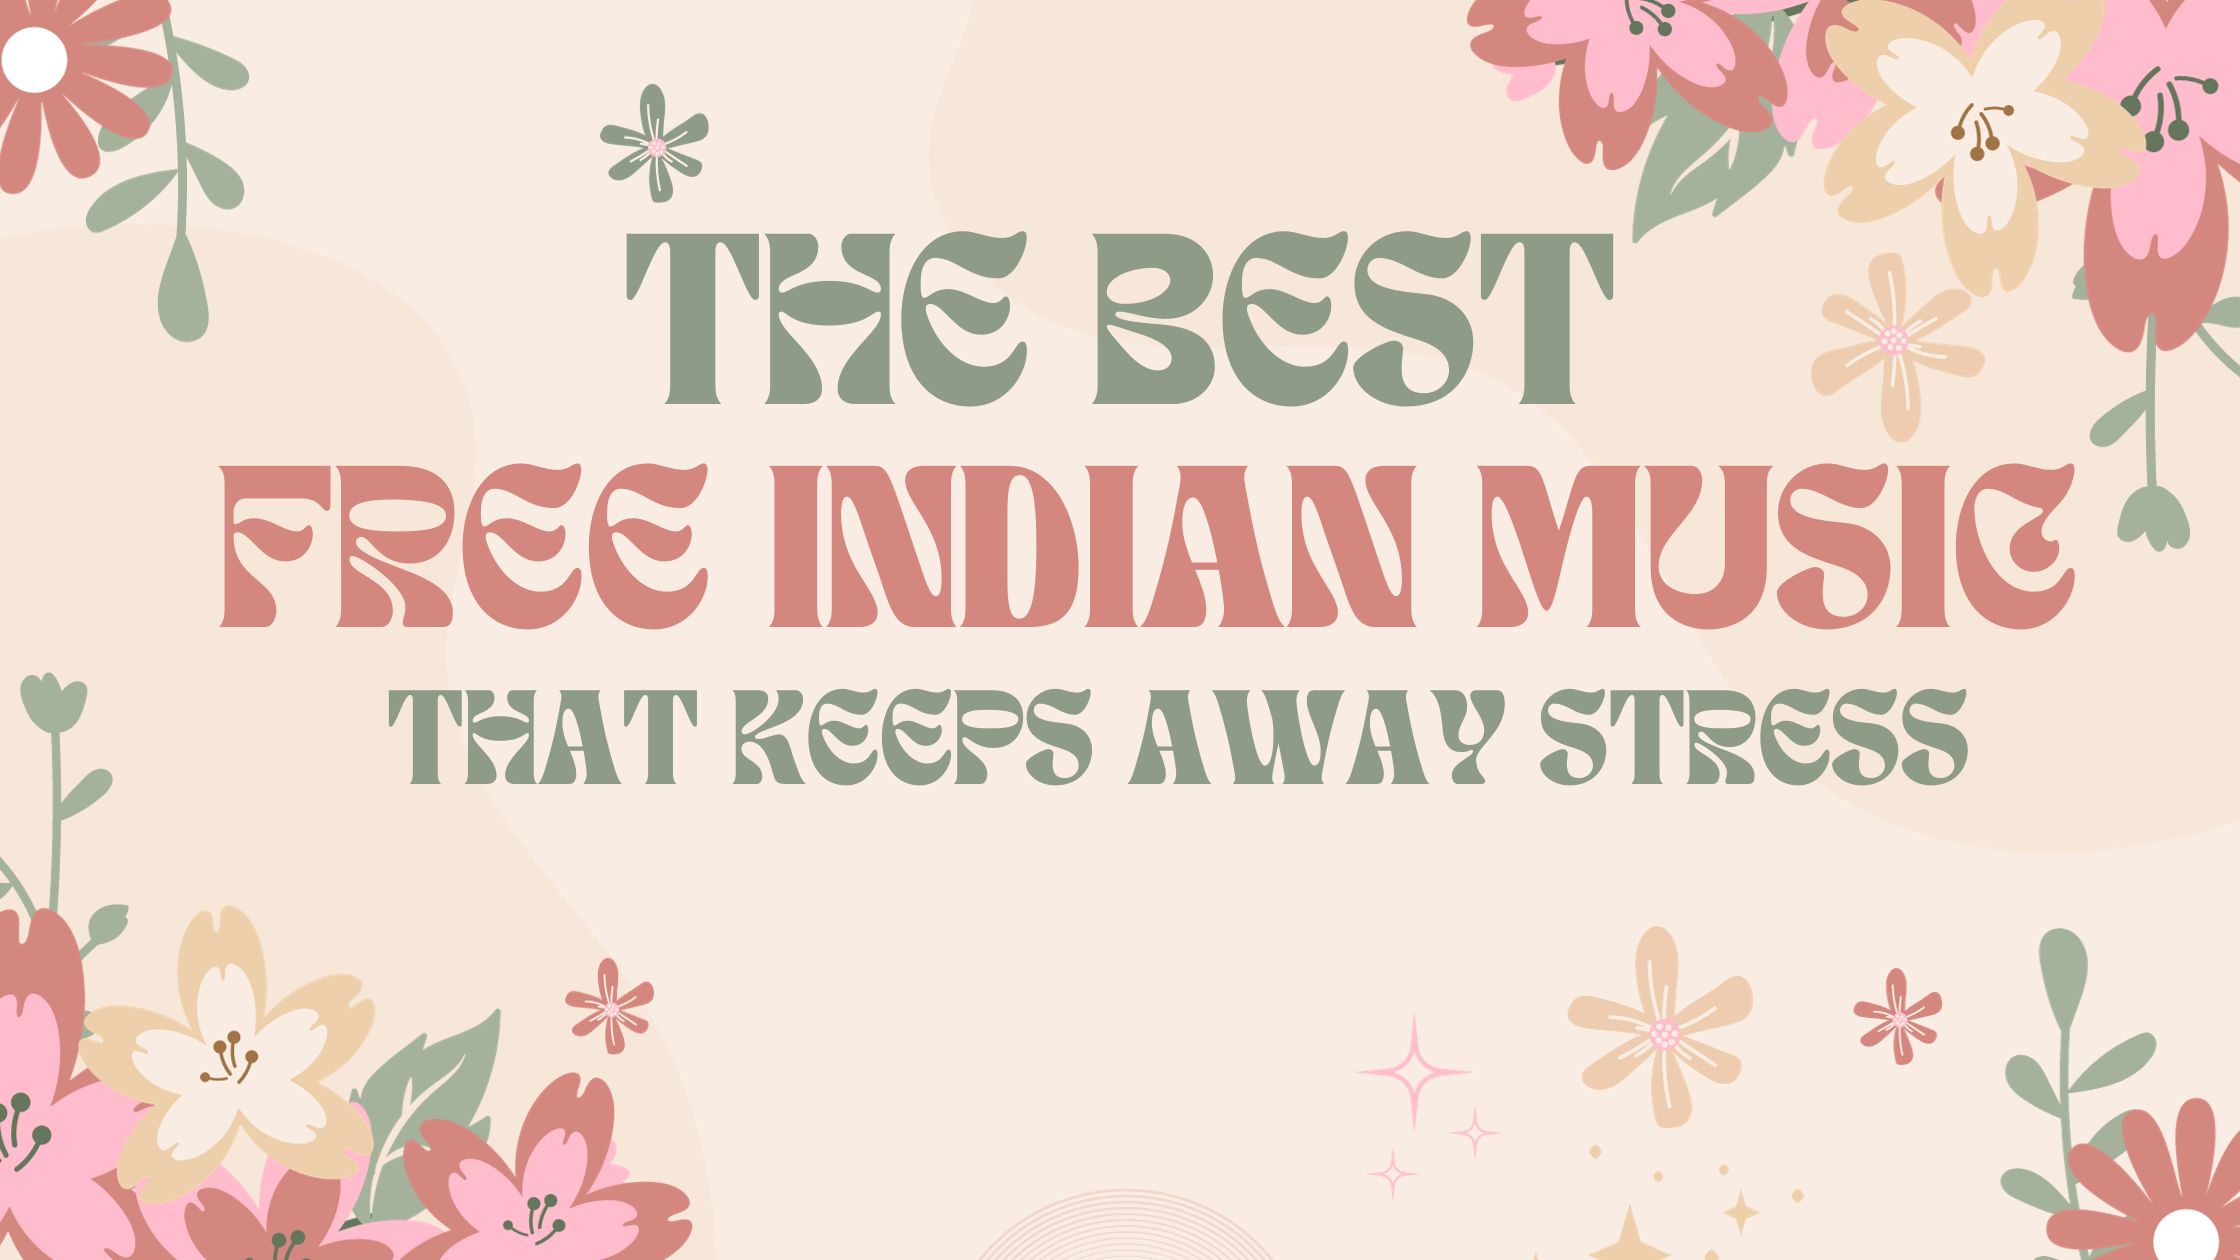 The best free Indian music that keeps away stress